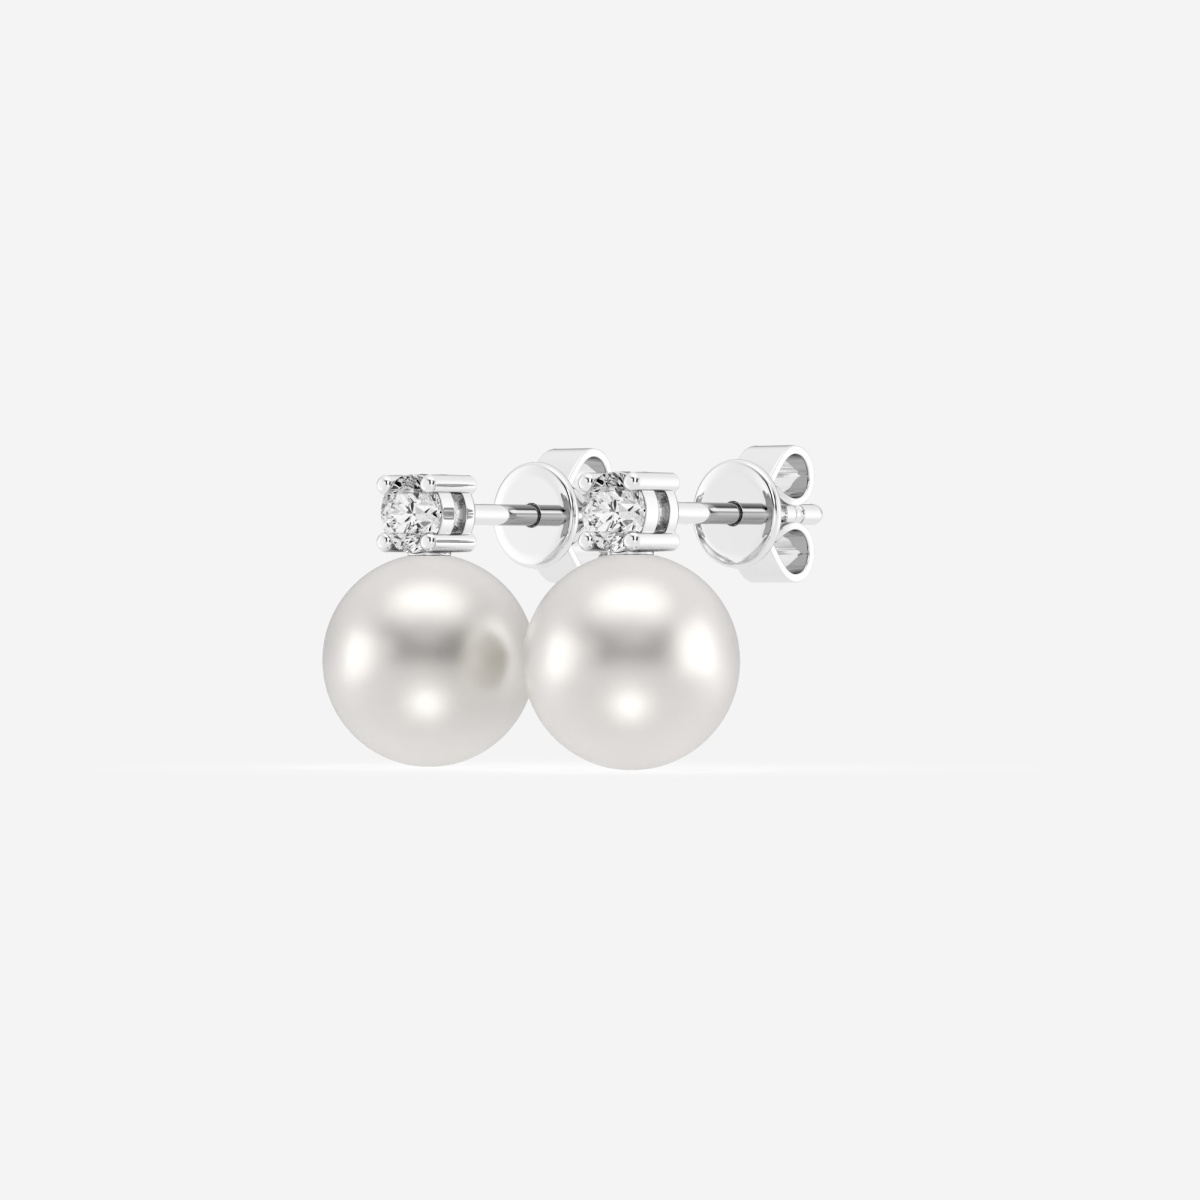 Additional Image 1 for  8.5 - 9.0 mm Cultured Freshwater Pearl and 1/5 ctw Lab Grown Diamond Stud Earrings